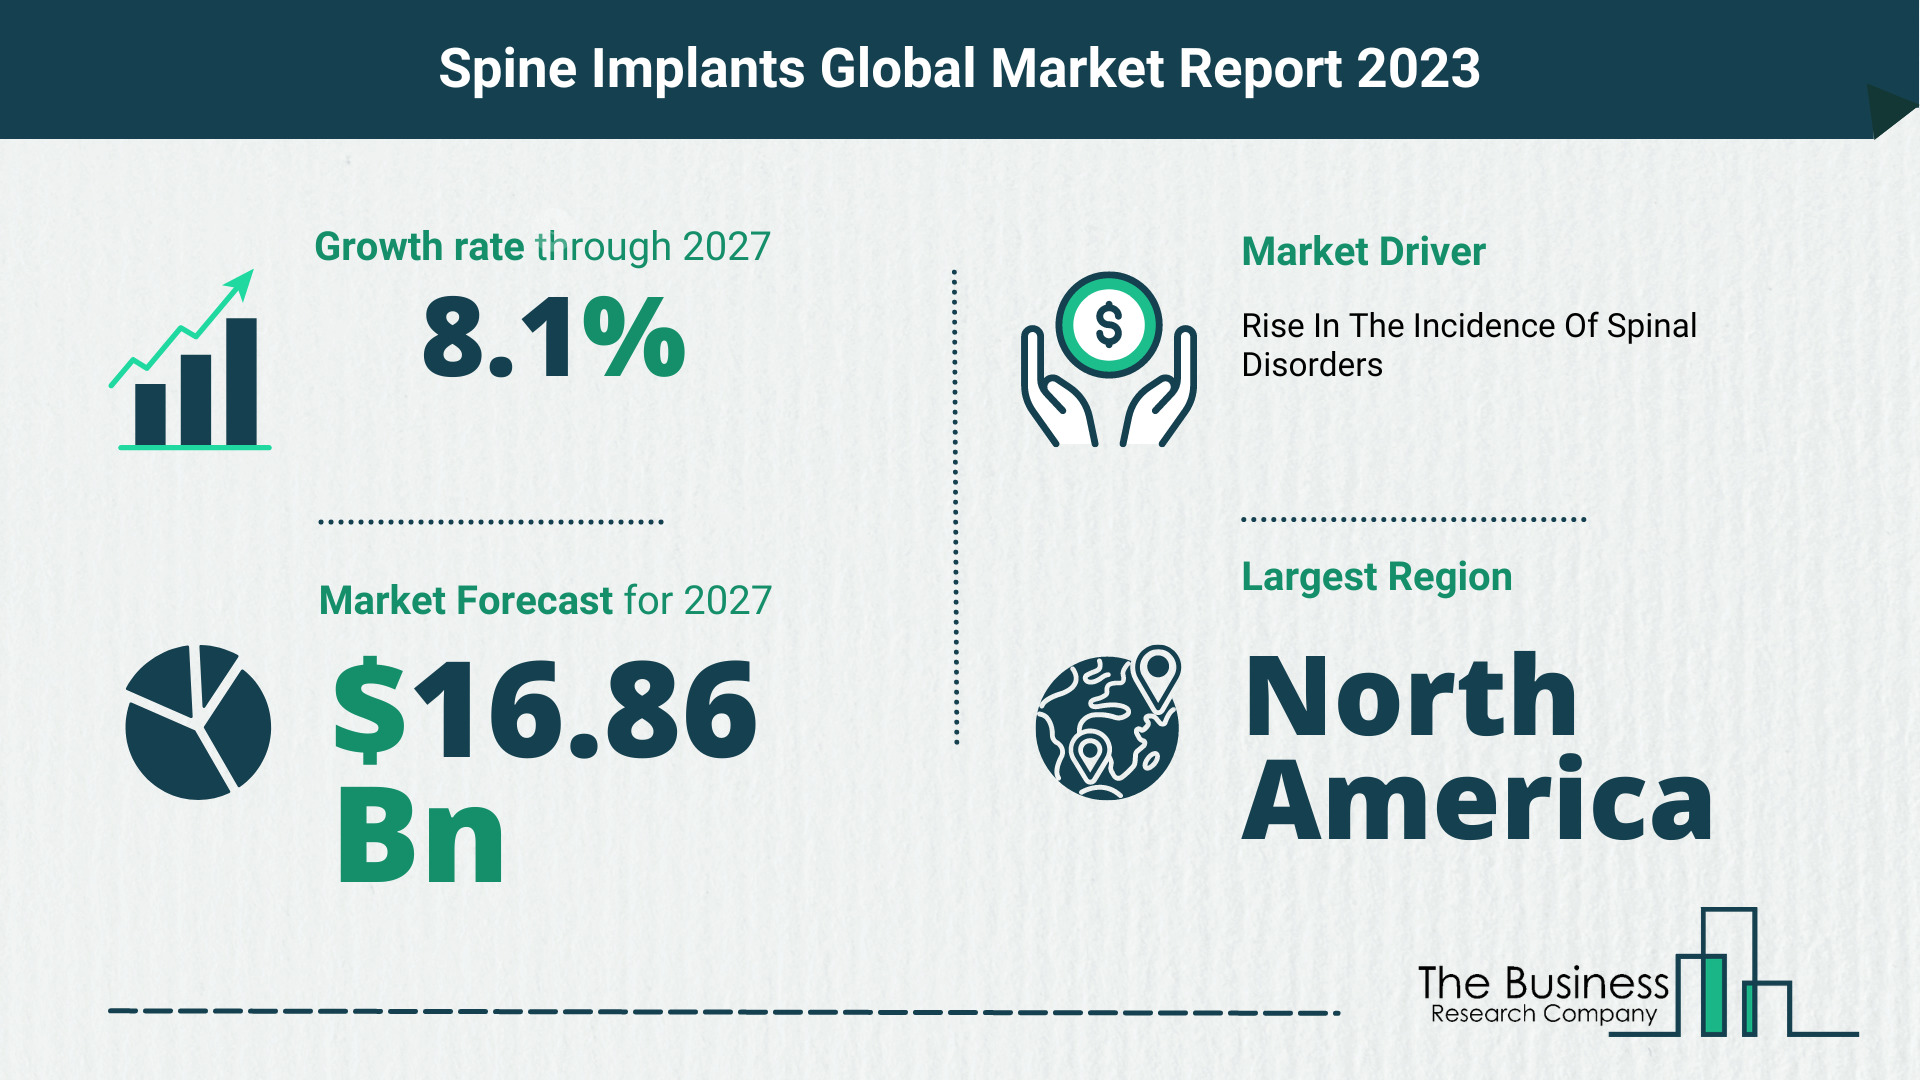 Global Spine Implants Market Opportunities And Strategies 2023